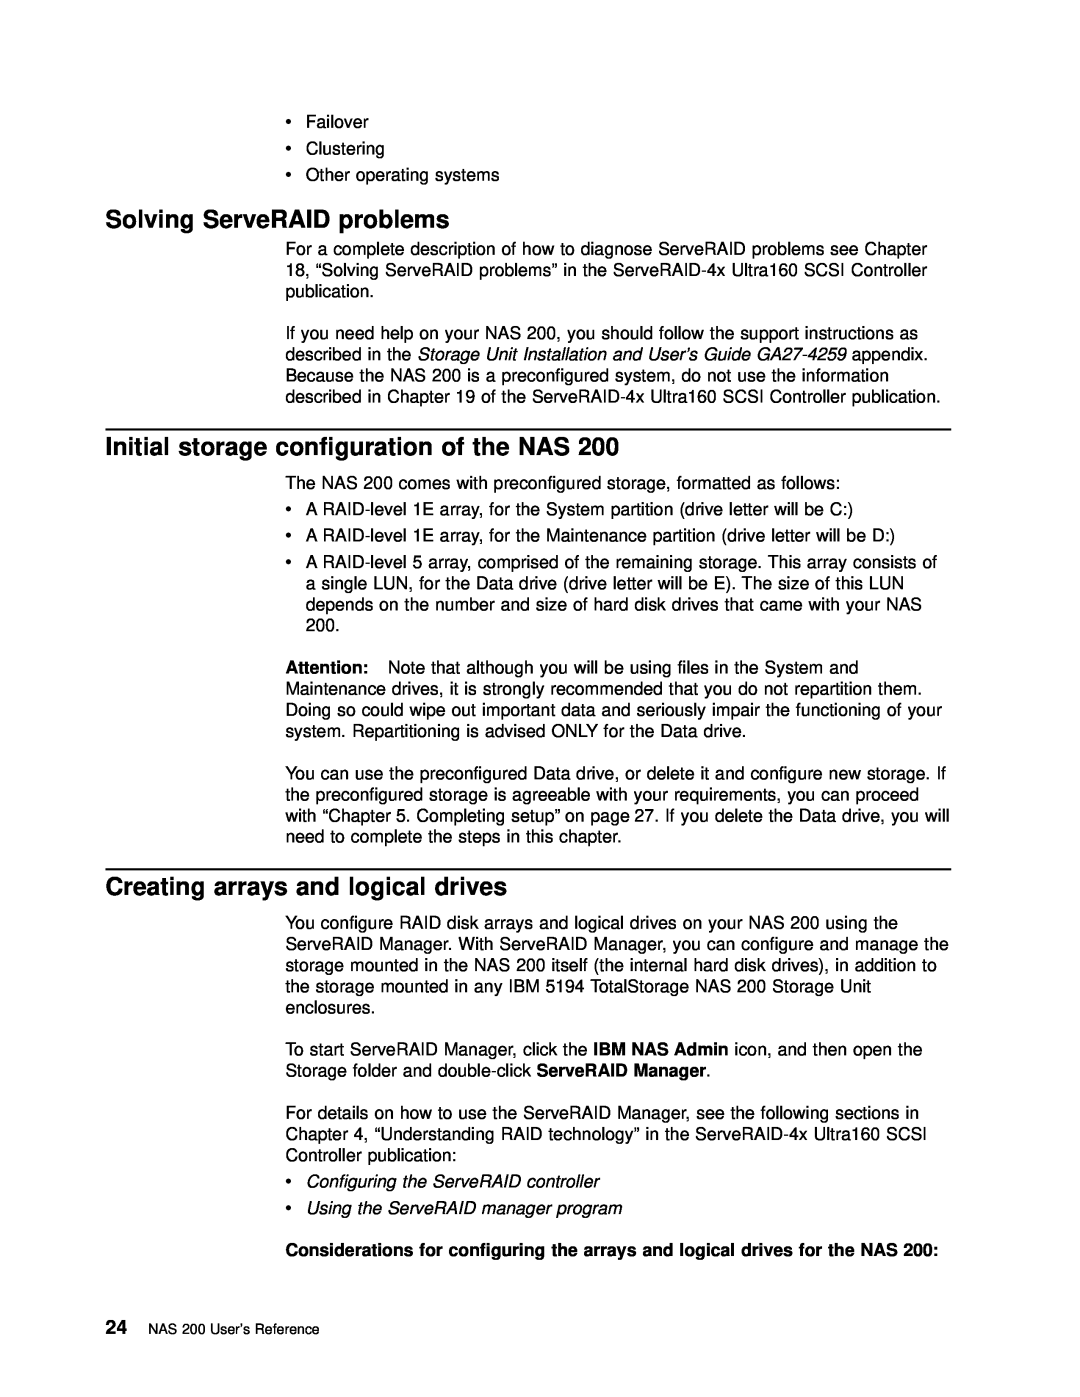 IBM 201 manual Solving ServeRAID problems, Initial storage configuration of the NAS, Creating arrays and logical drives 